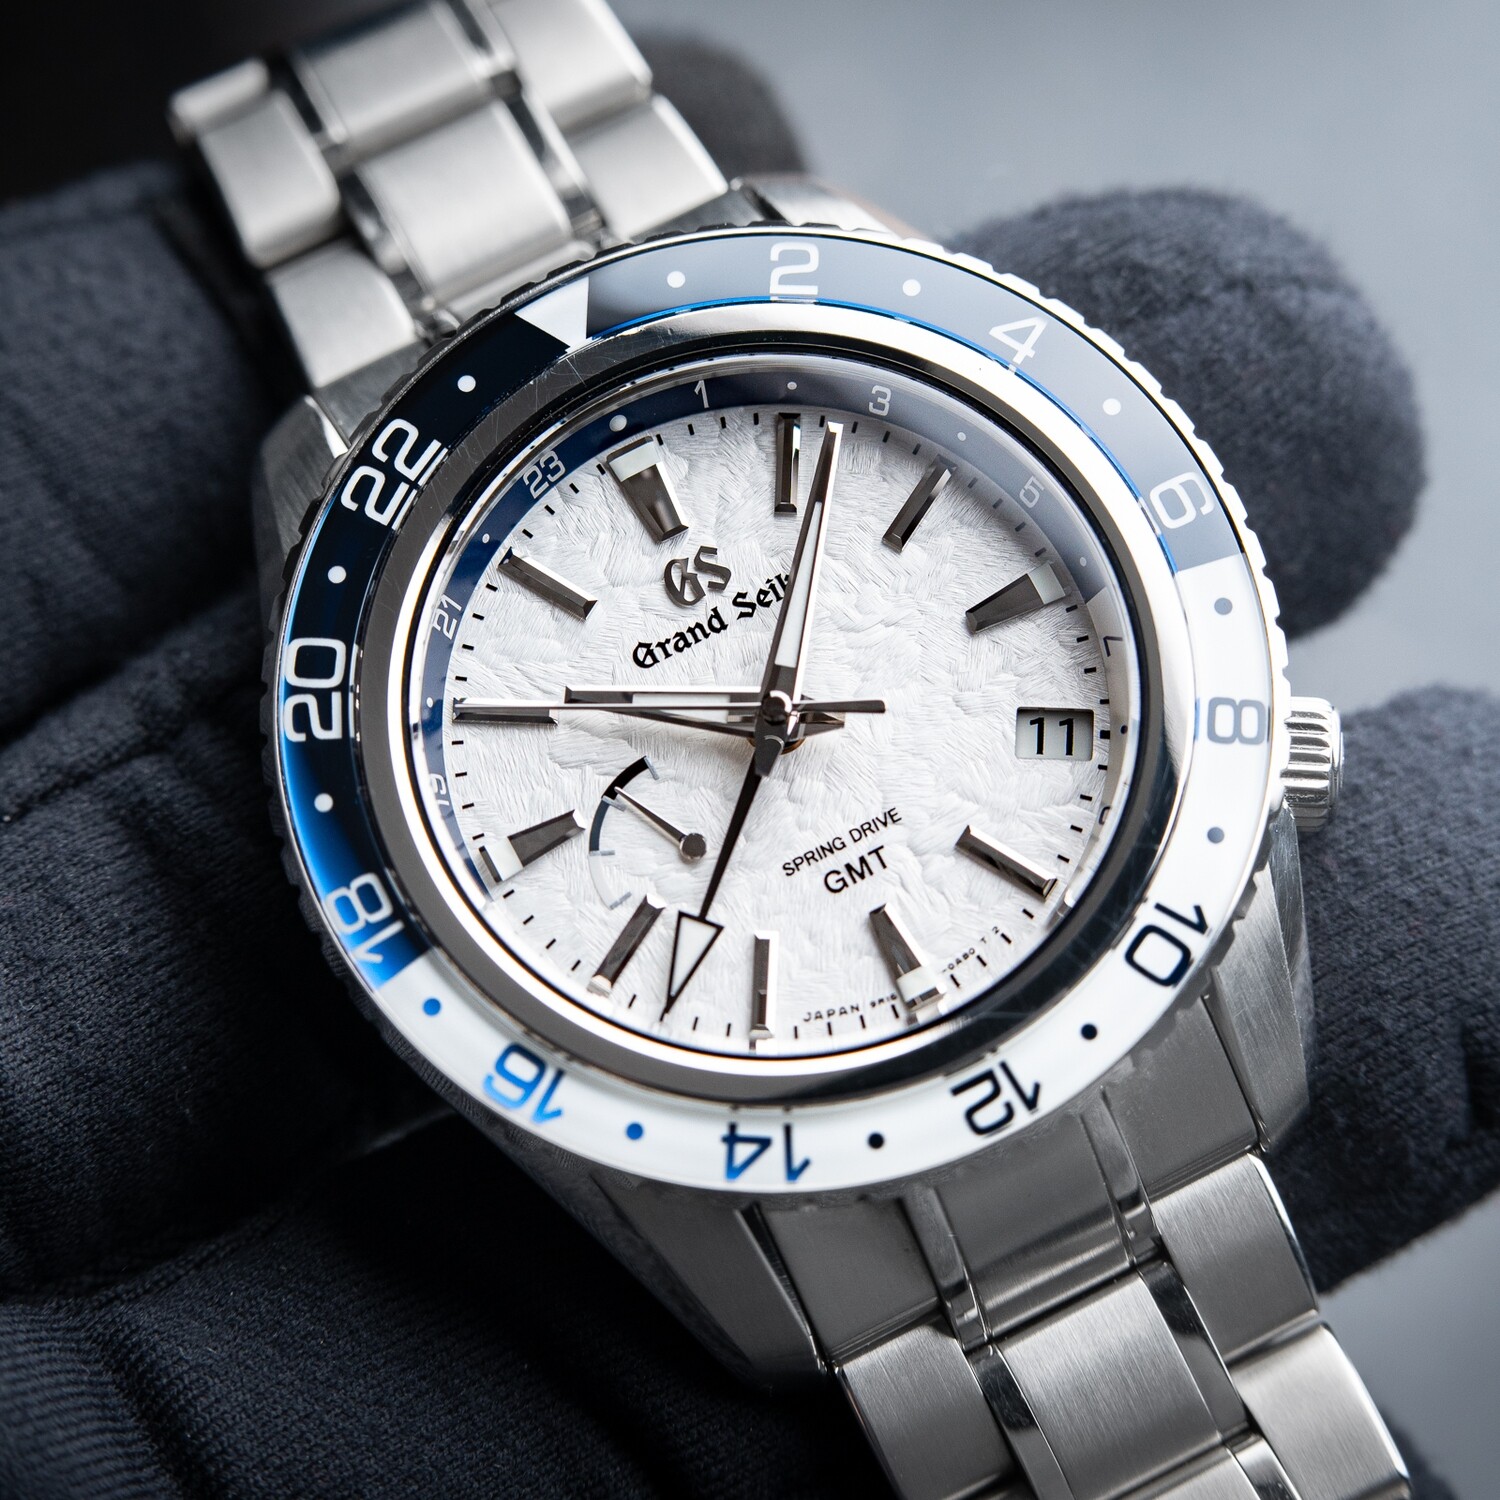 Grand Seiko Spring Drive Sport GMT Limited Edition "Iceman" 44mm SBGE275